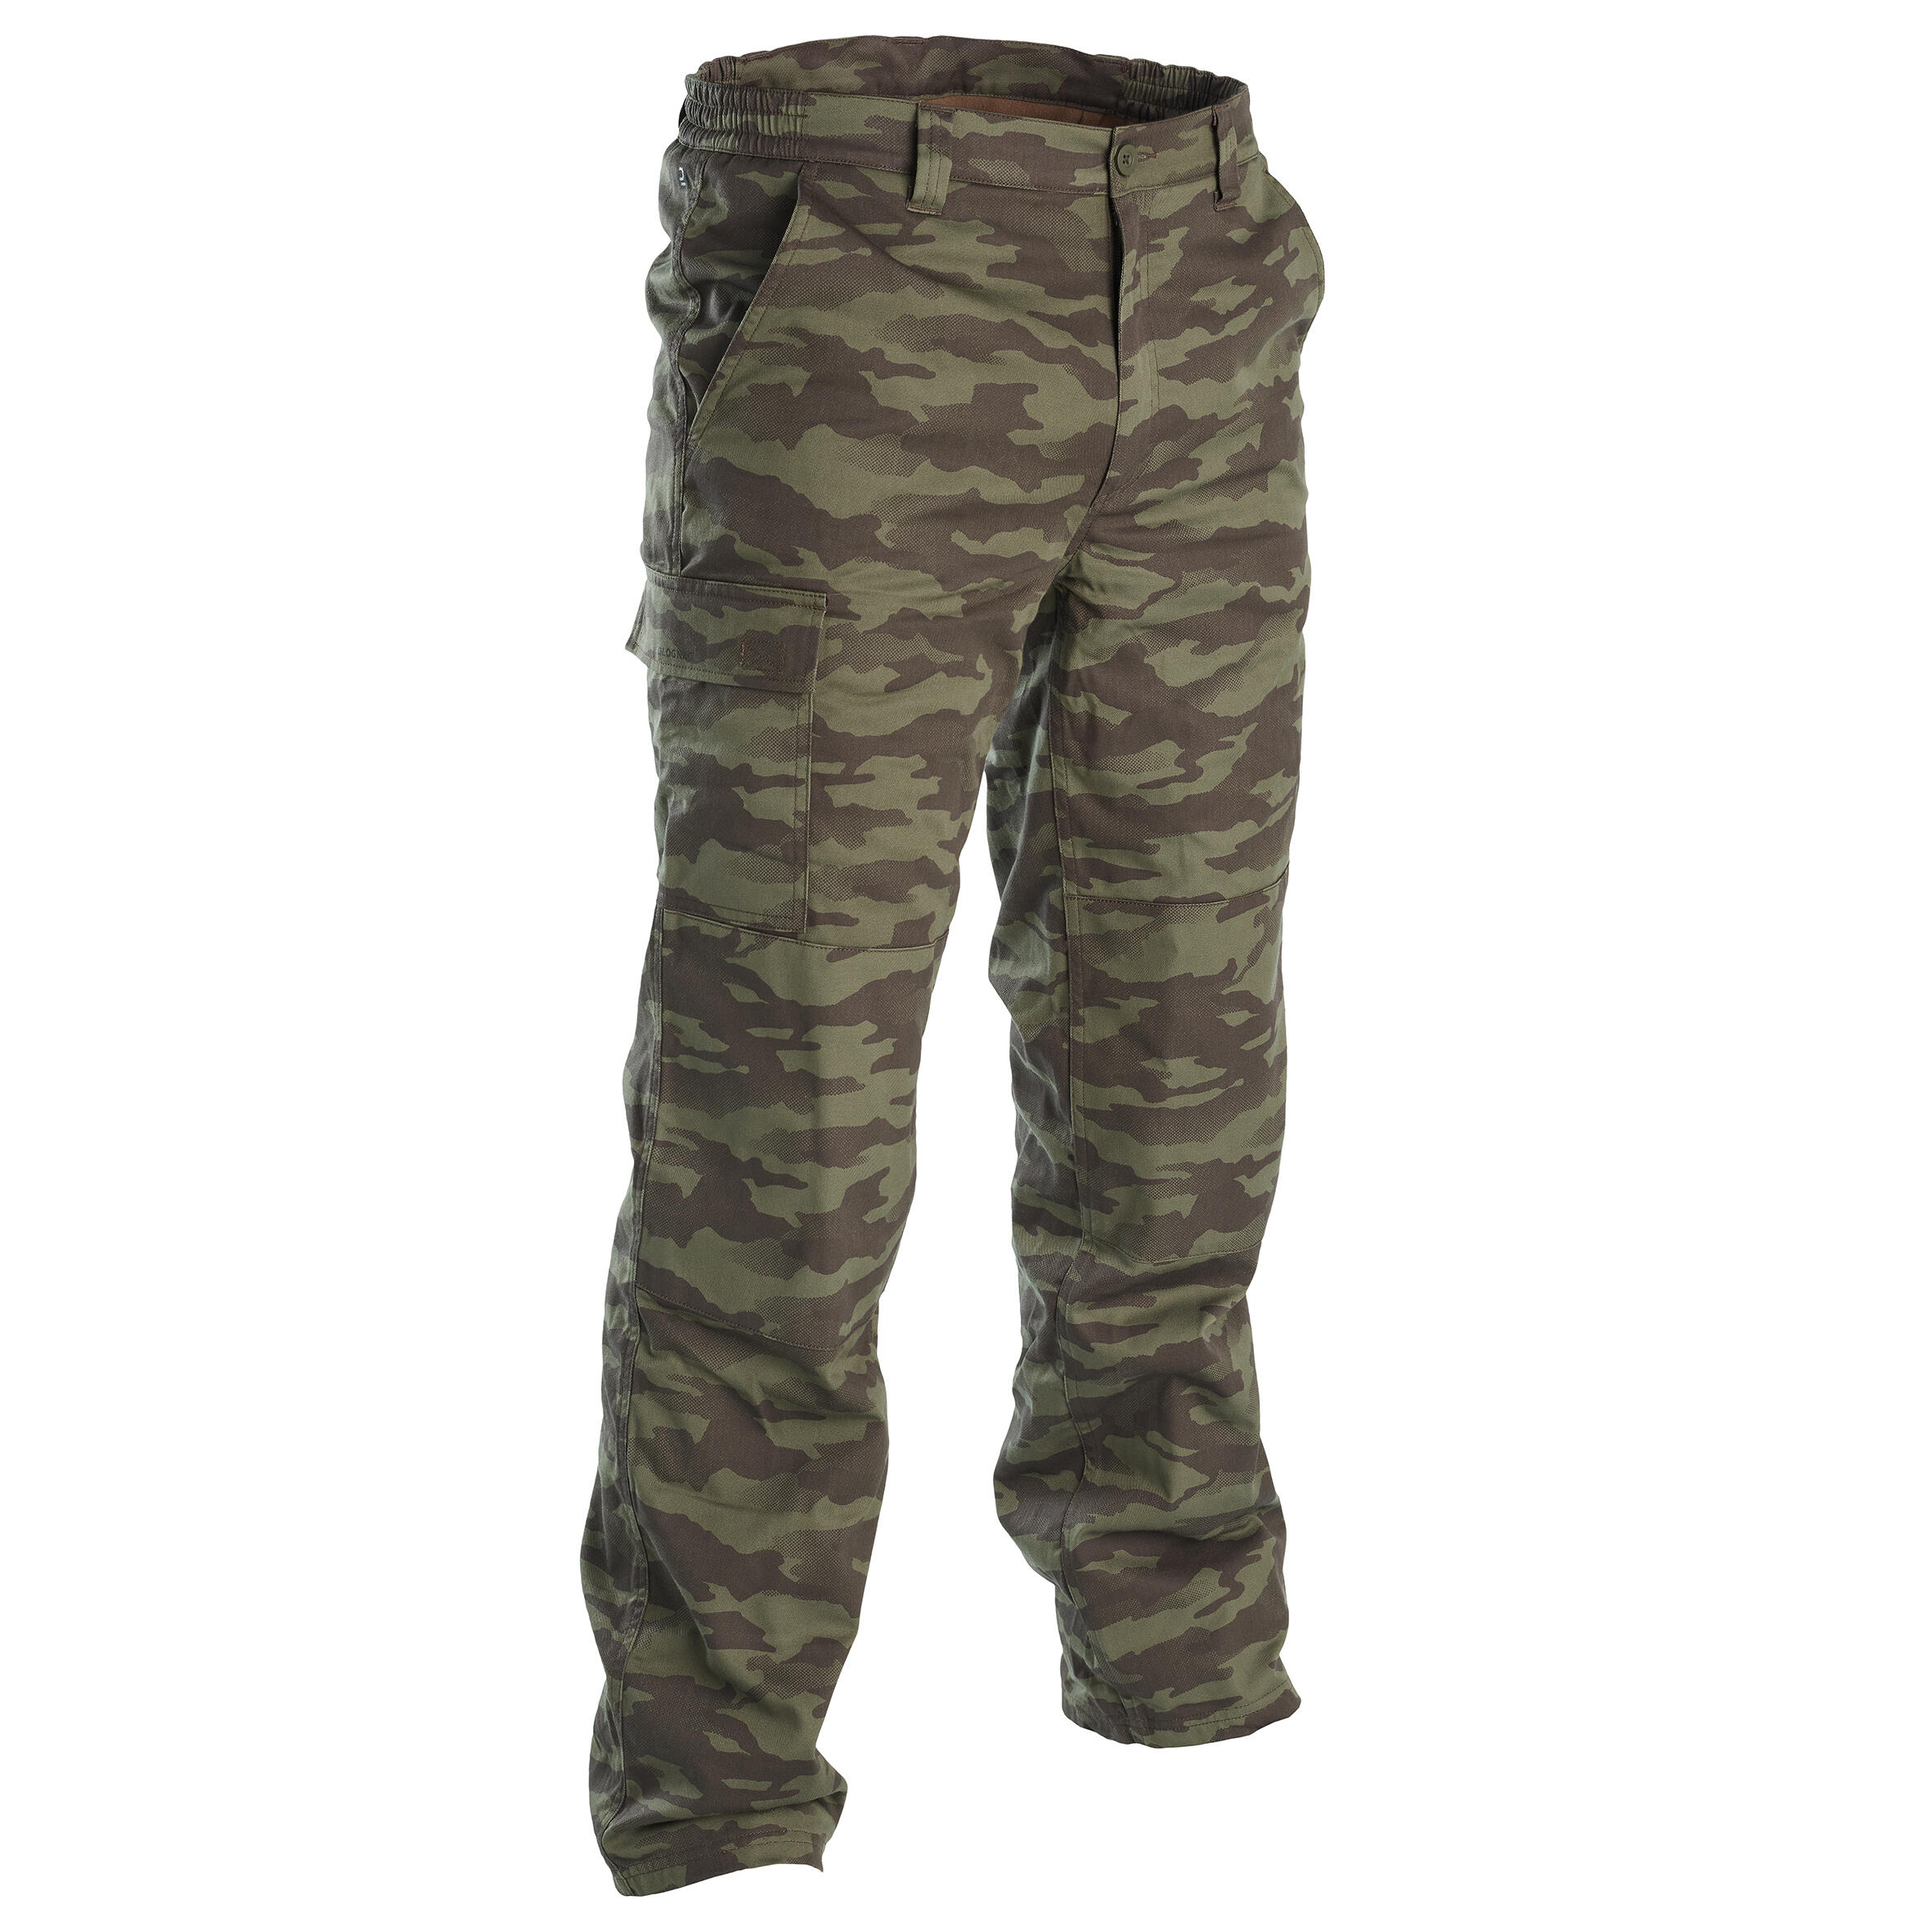 SOLOGNAC WARM HUNTING TROUSERS CAMOUFLAGE 100